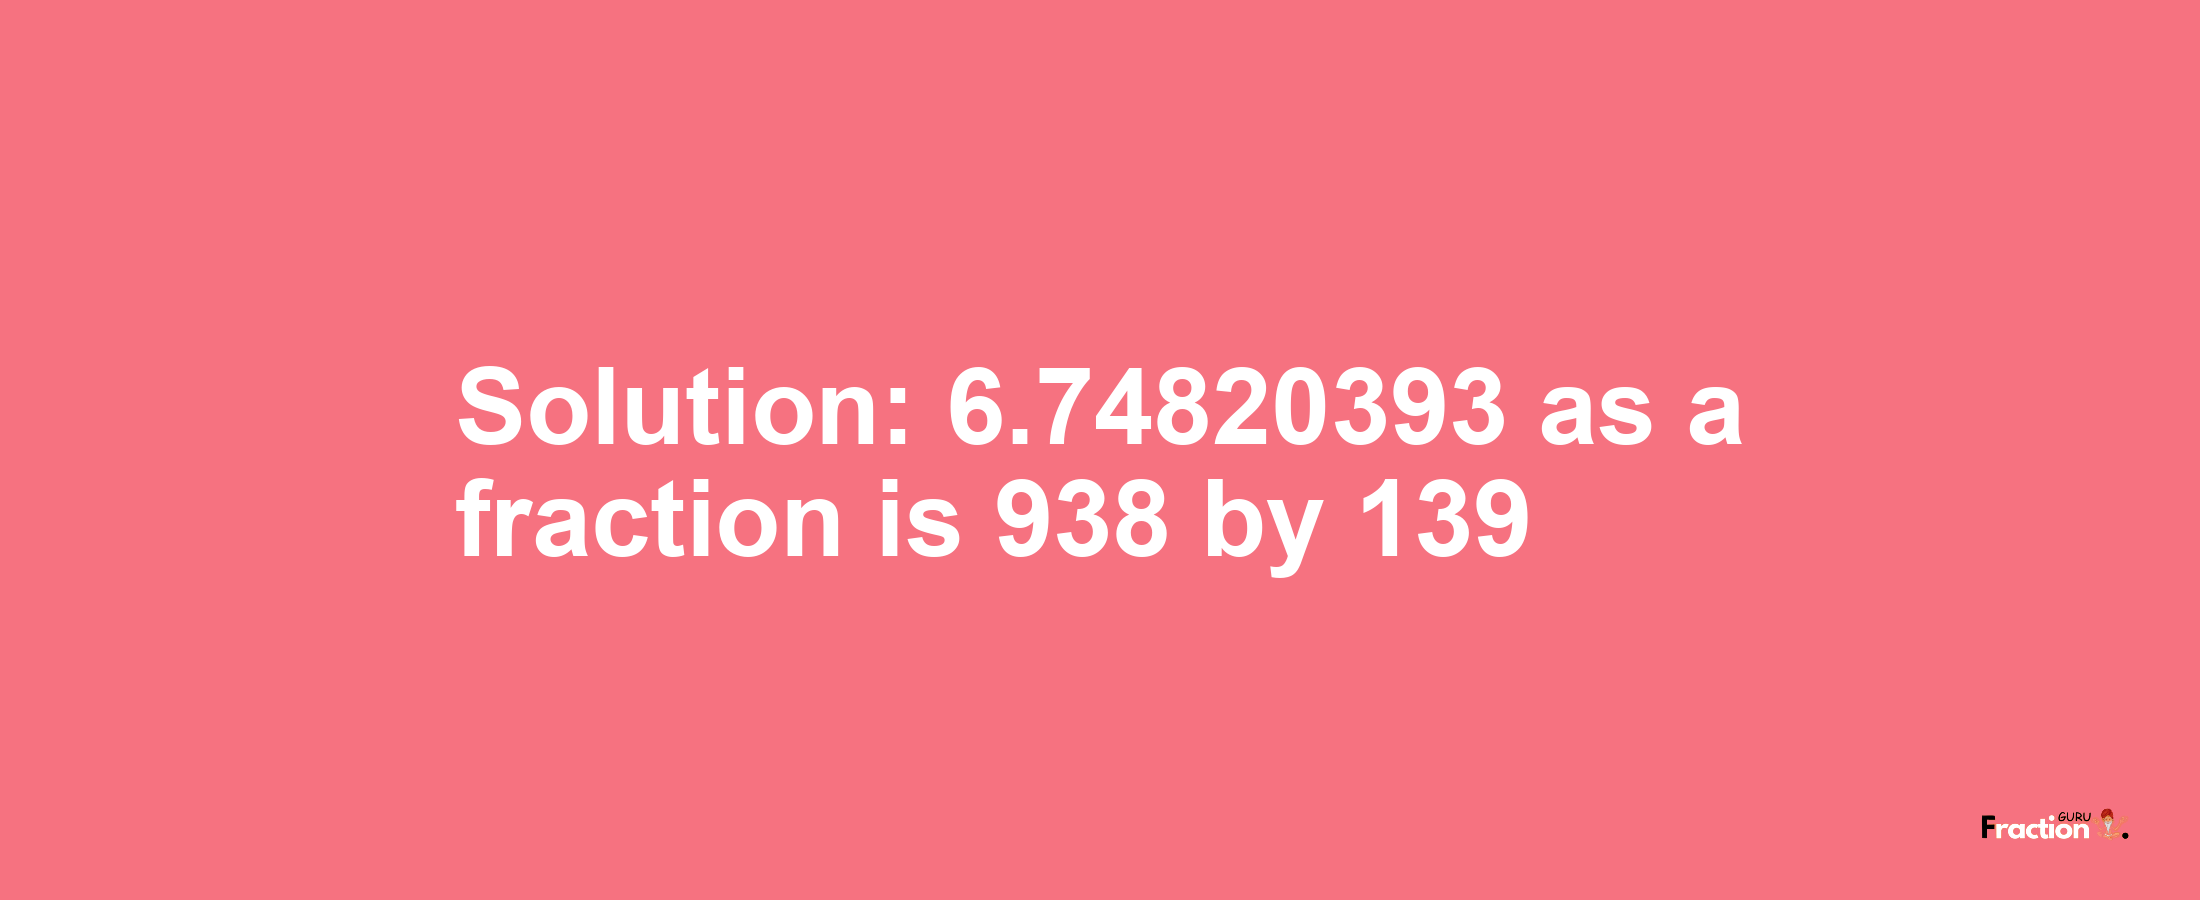 Solution:6.74820393 as a fraction is 938/139